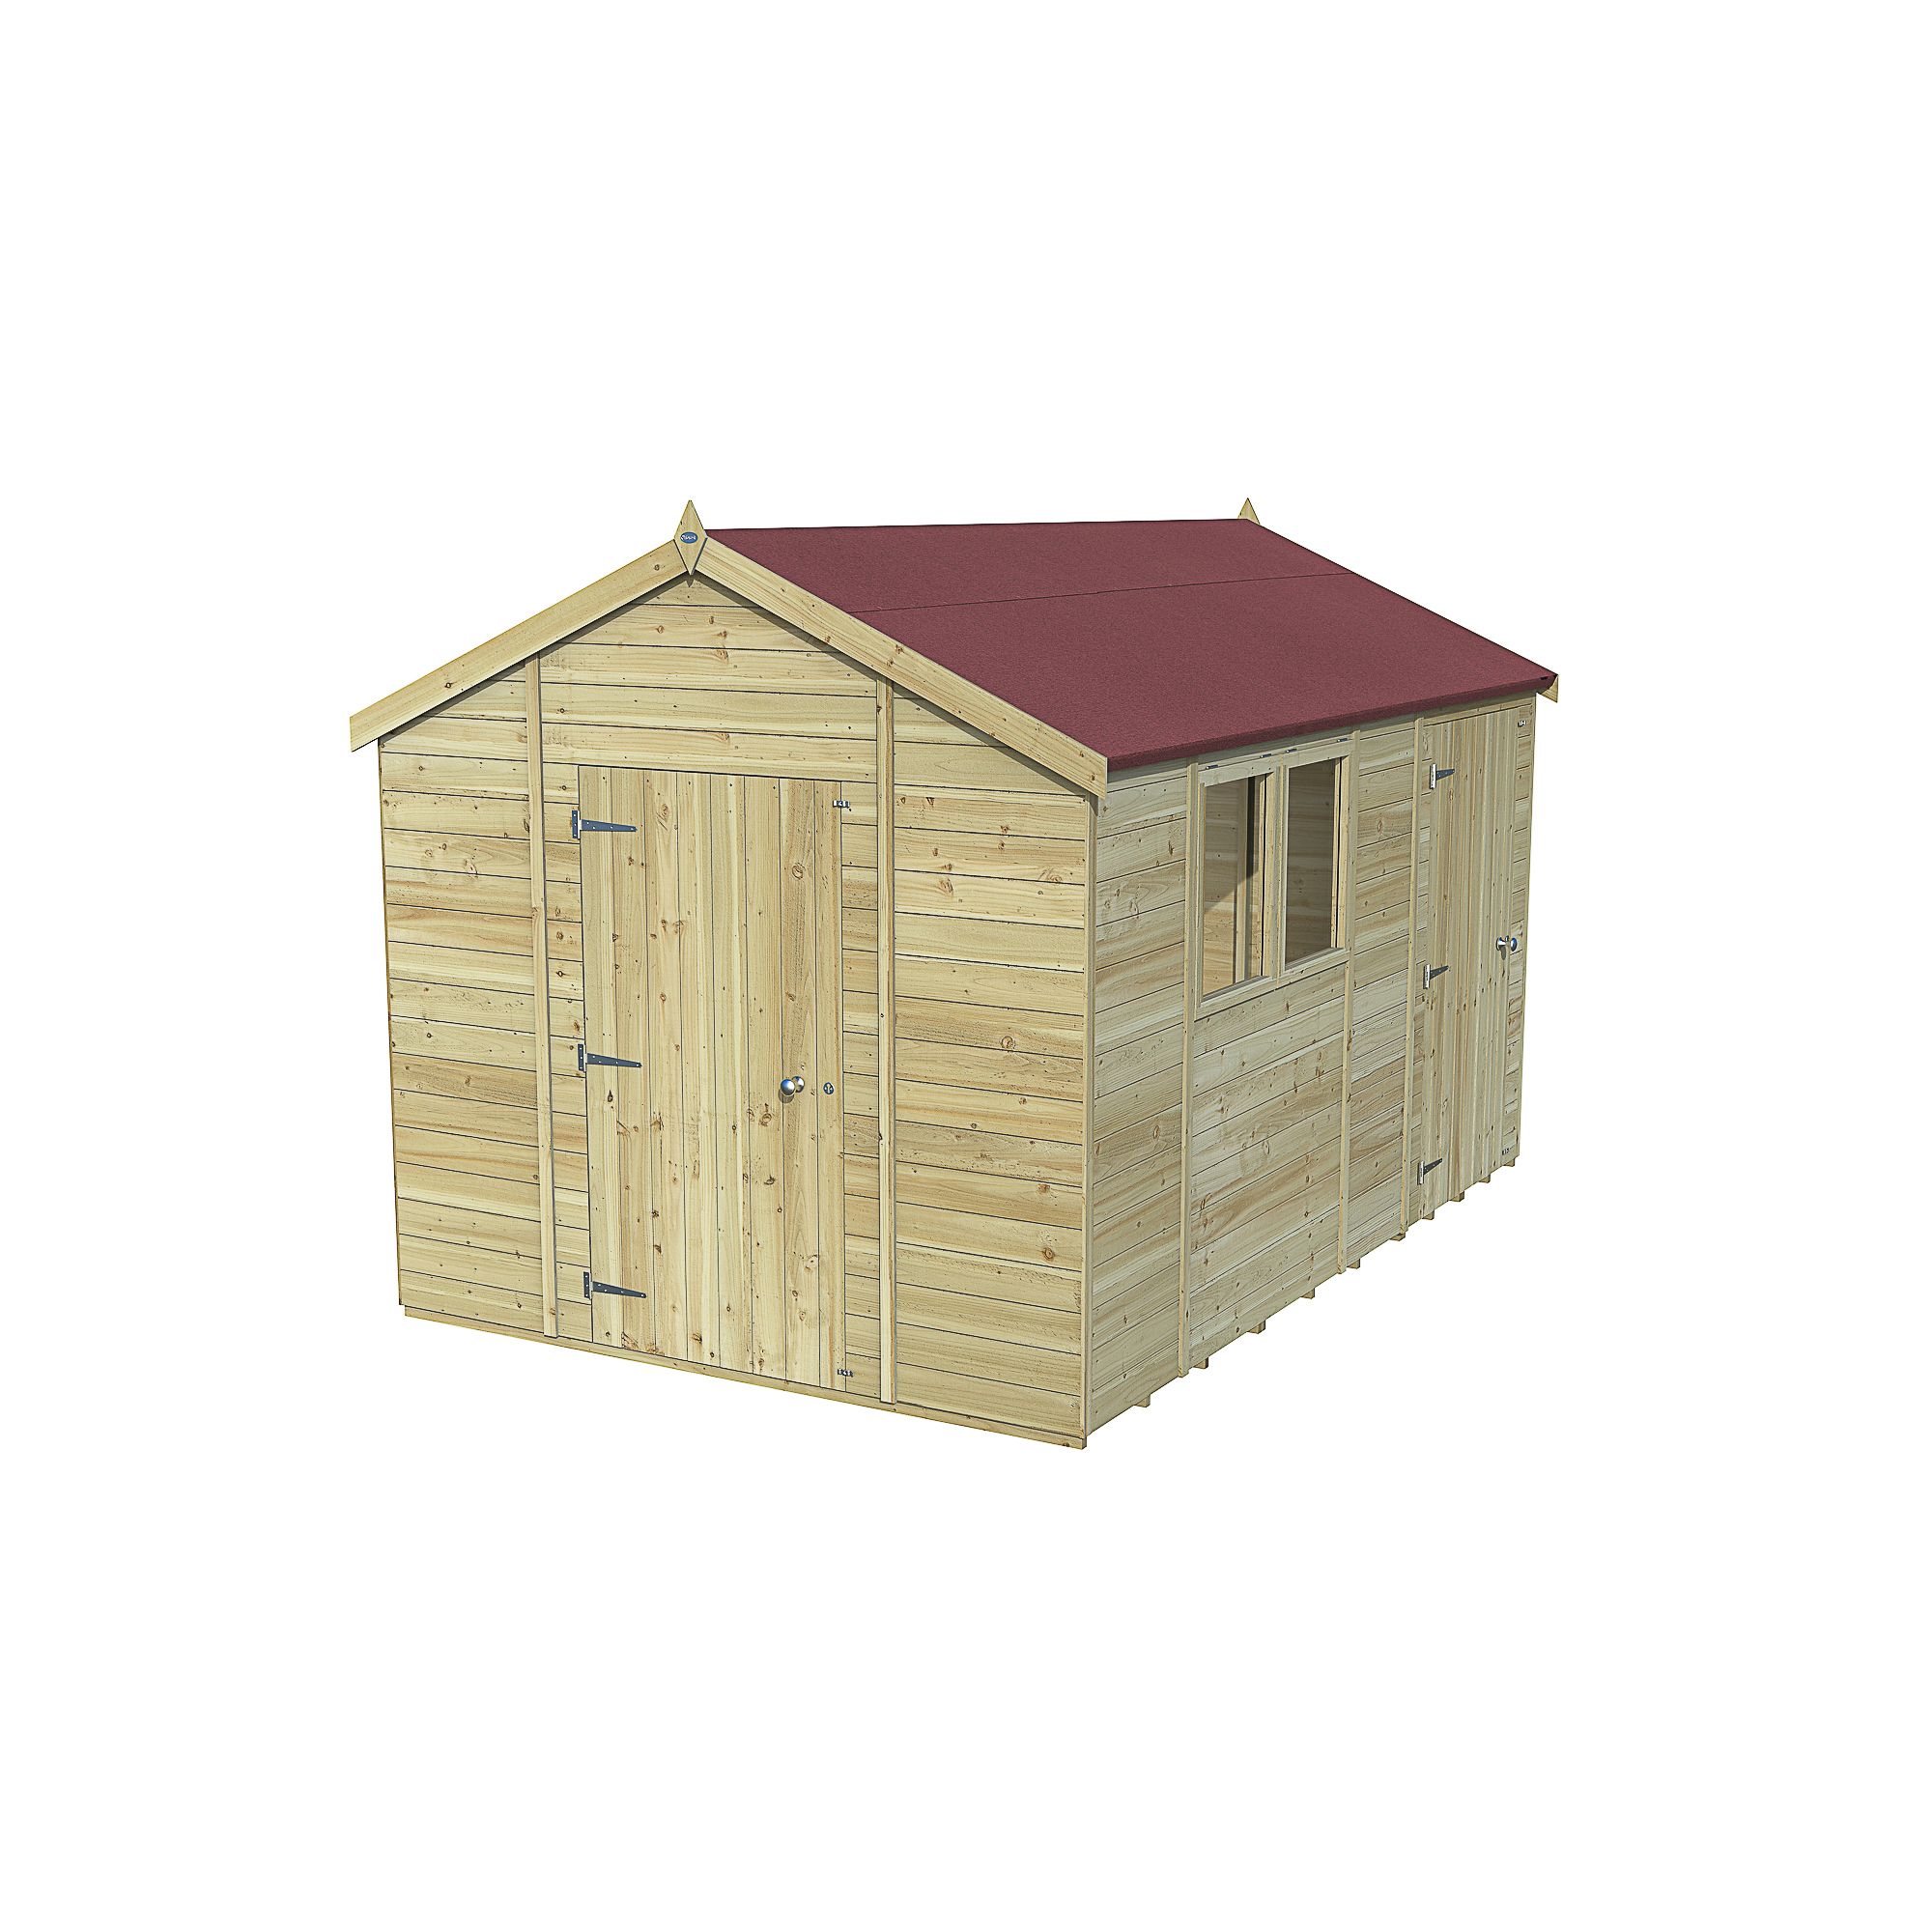 Forest Garden Timberdale Tongue & groove 12x8 ft Apex Wooden Pressure treated Shed with floor